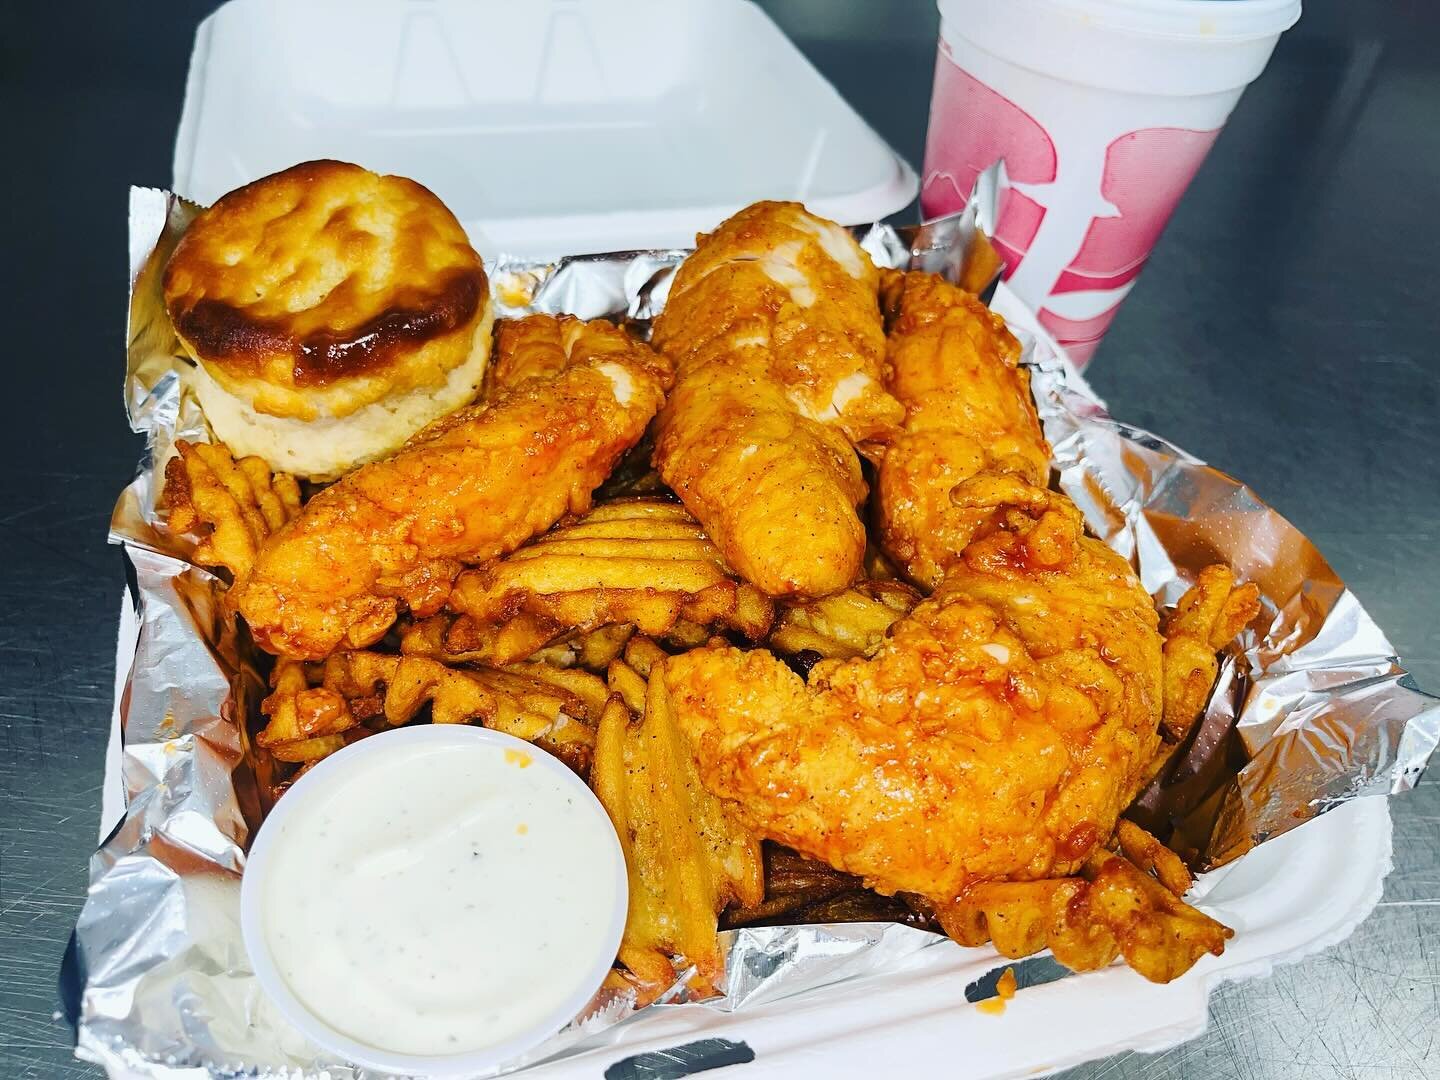 For the month of April, we are keep it HOT!

Hot Honey Jumbo Tenders Combo.

4 jumbo tenders tossed in Hot Honey Sauce, waffle fries, biscuit, dipping sauce, served with a 16 oz. Fountain Drink!

For Full Menu, Go to BenzinasBistro.com. We Deliver th